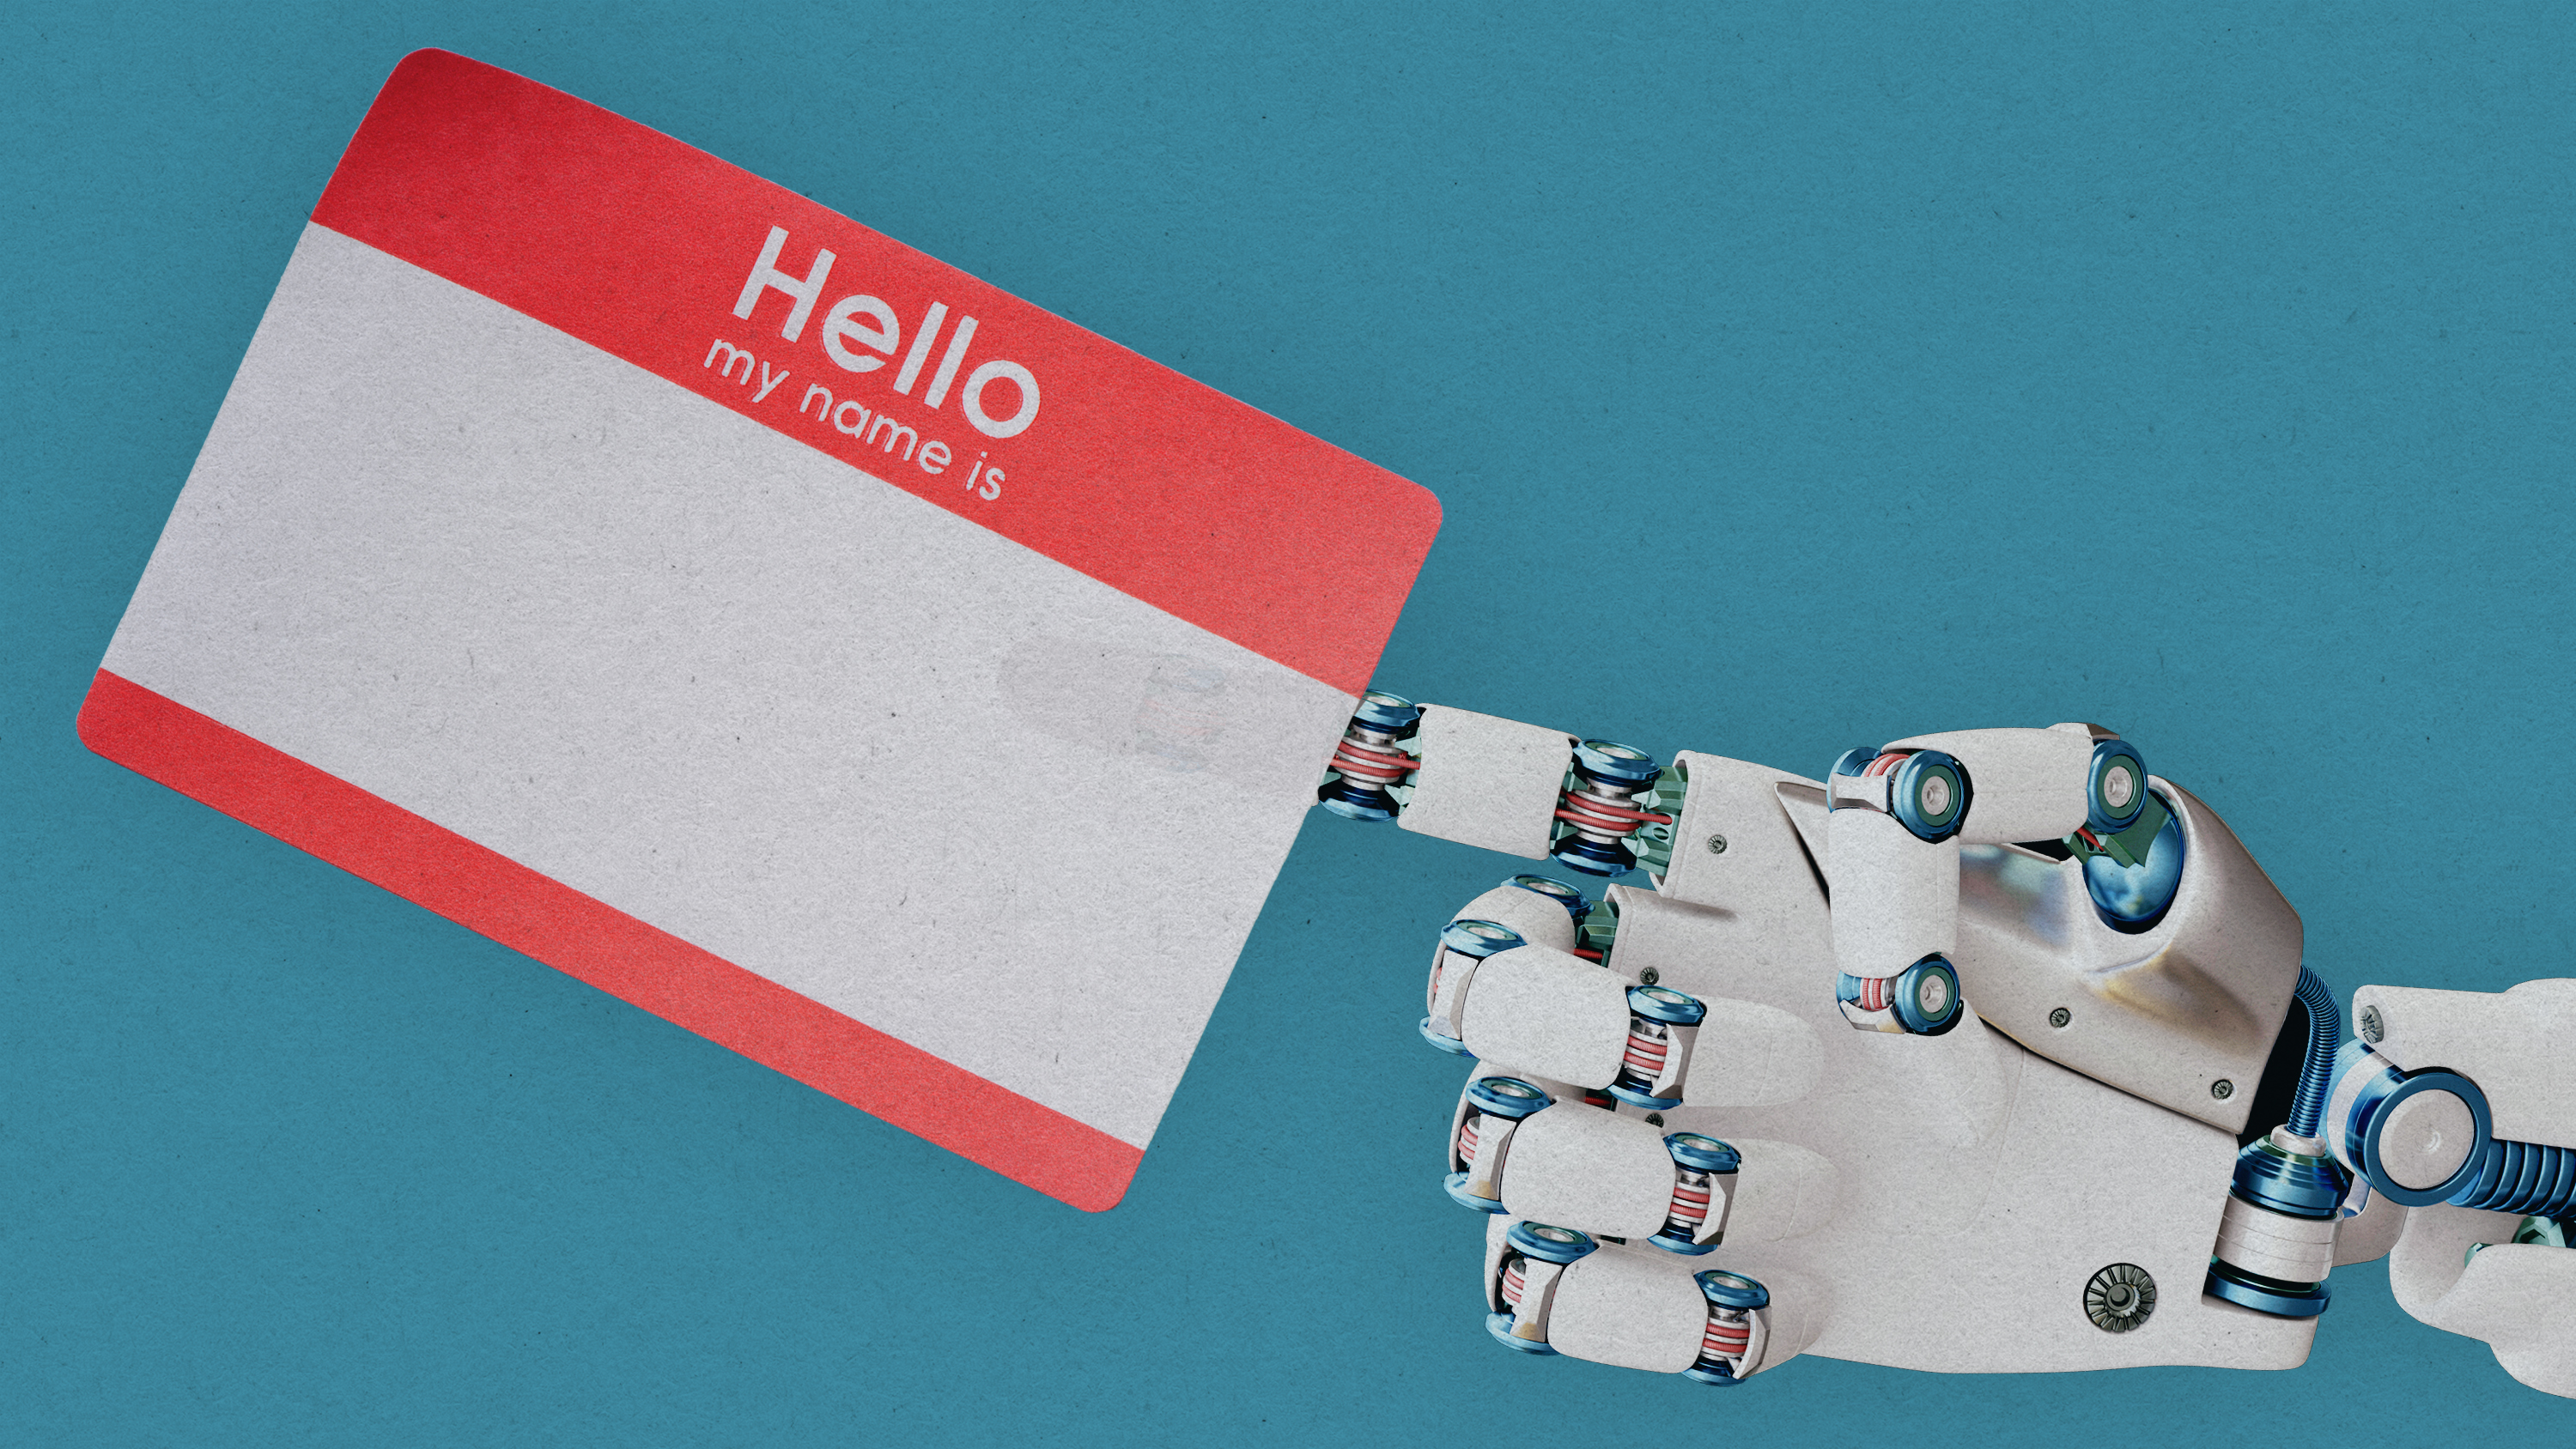 A robotic hand holding a blank name tag sticker